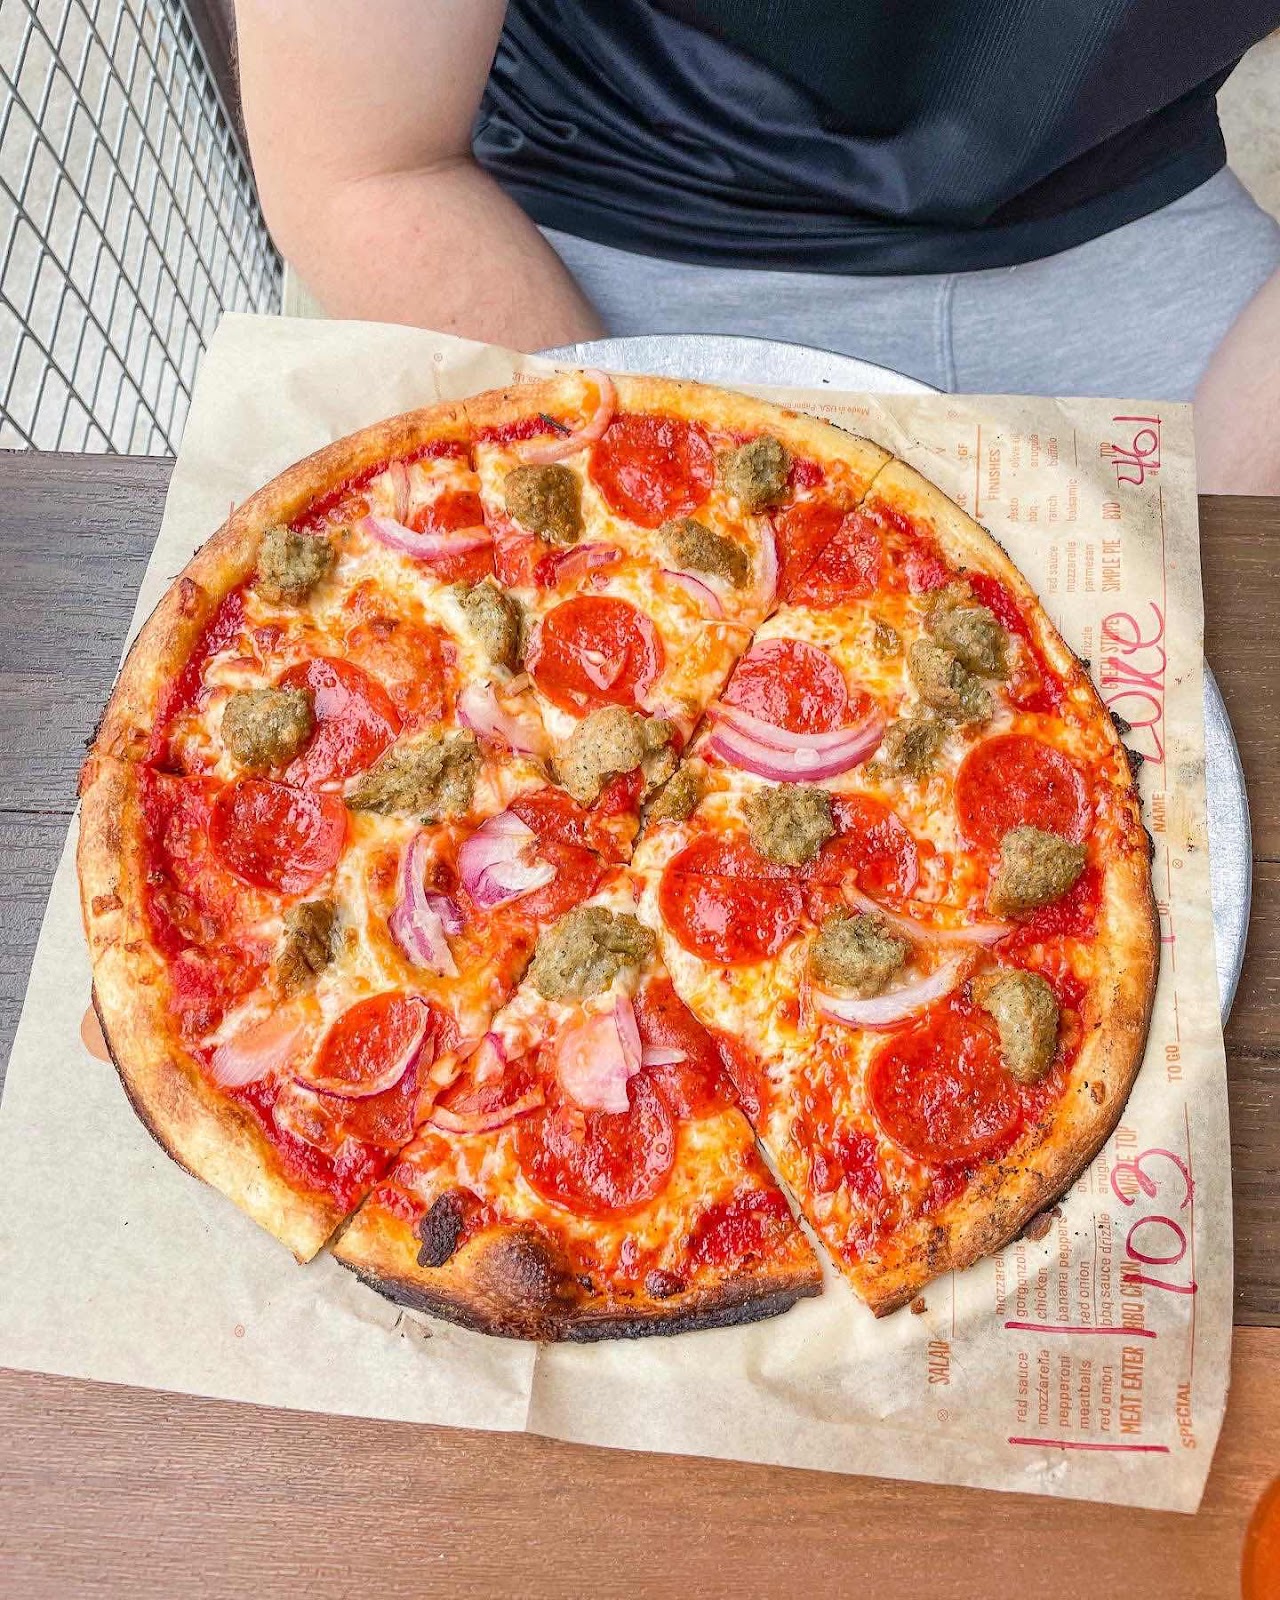 Meat Eater pizza from blaze pizza Disney springs